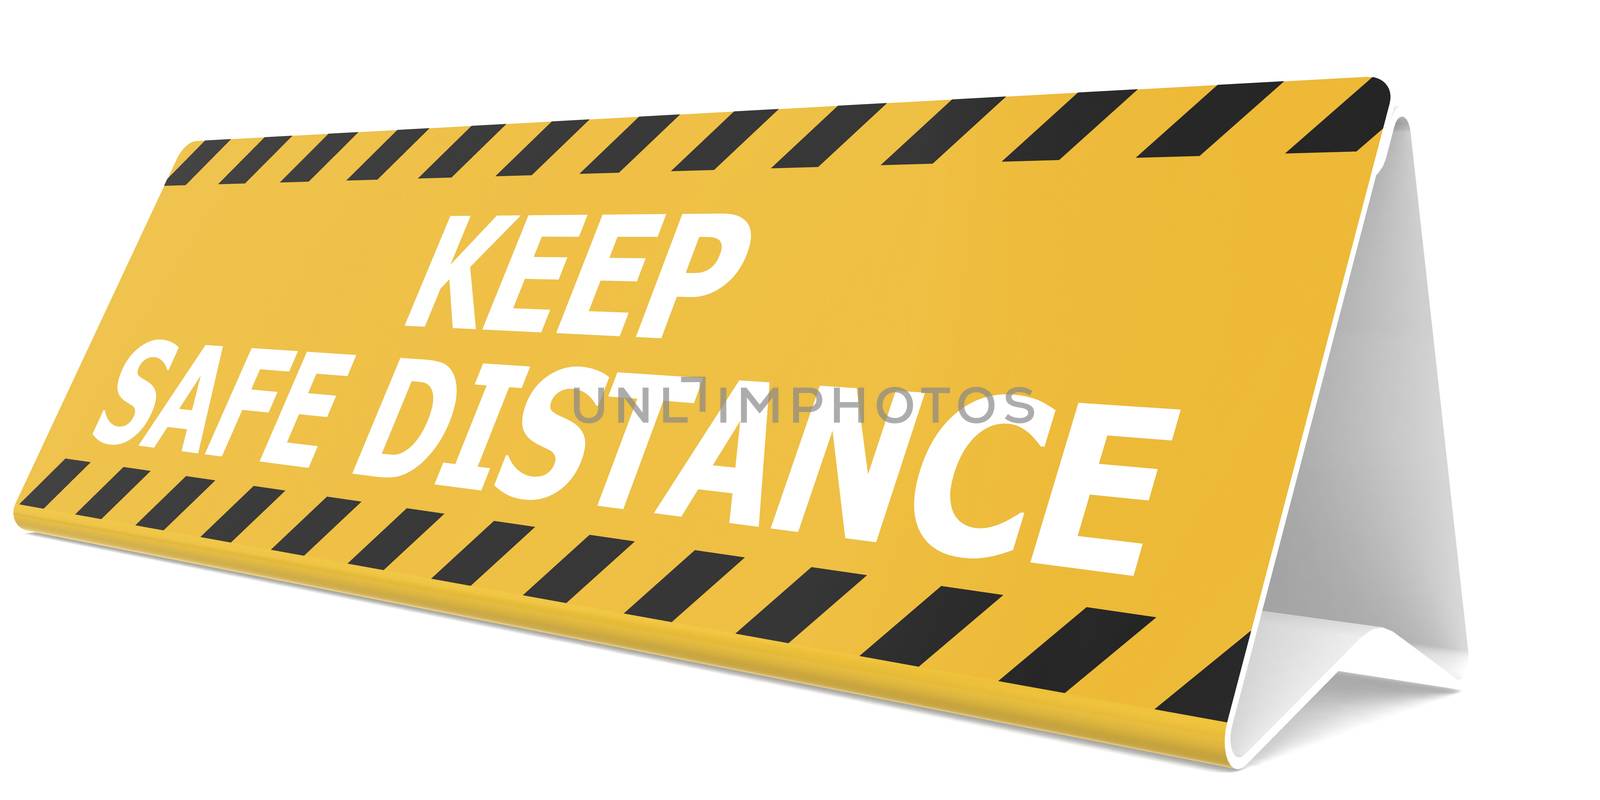 Table sign with keep safe distance word, 3D rendering